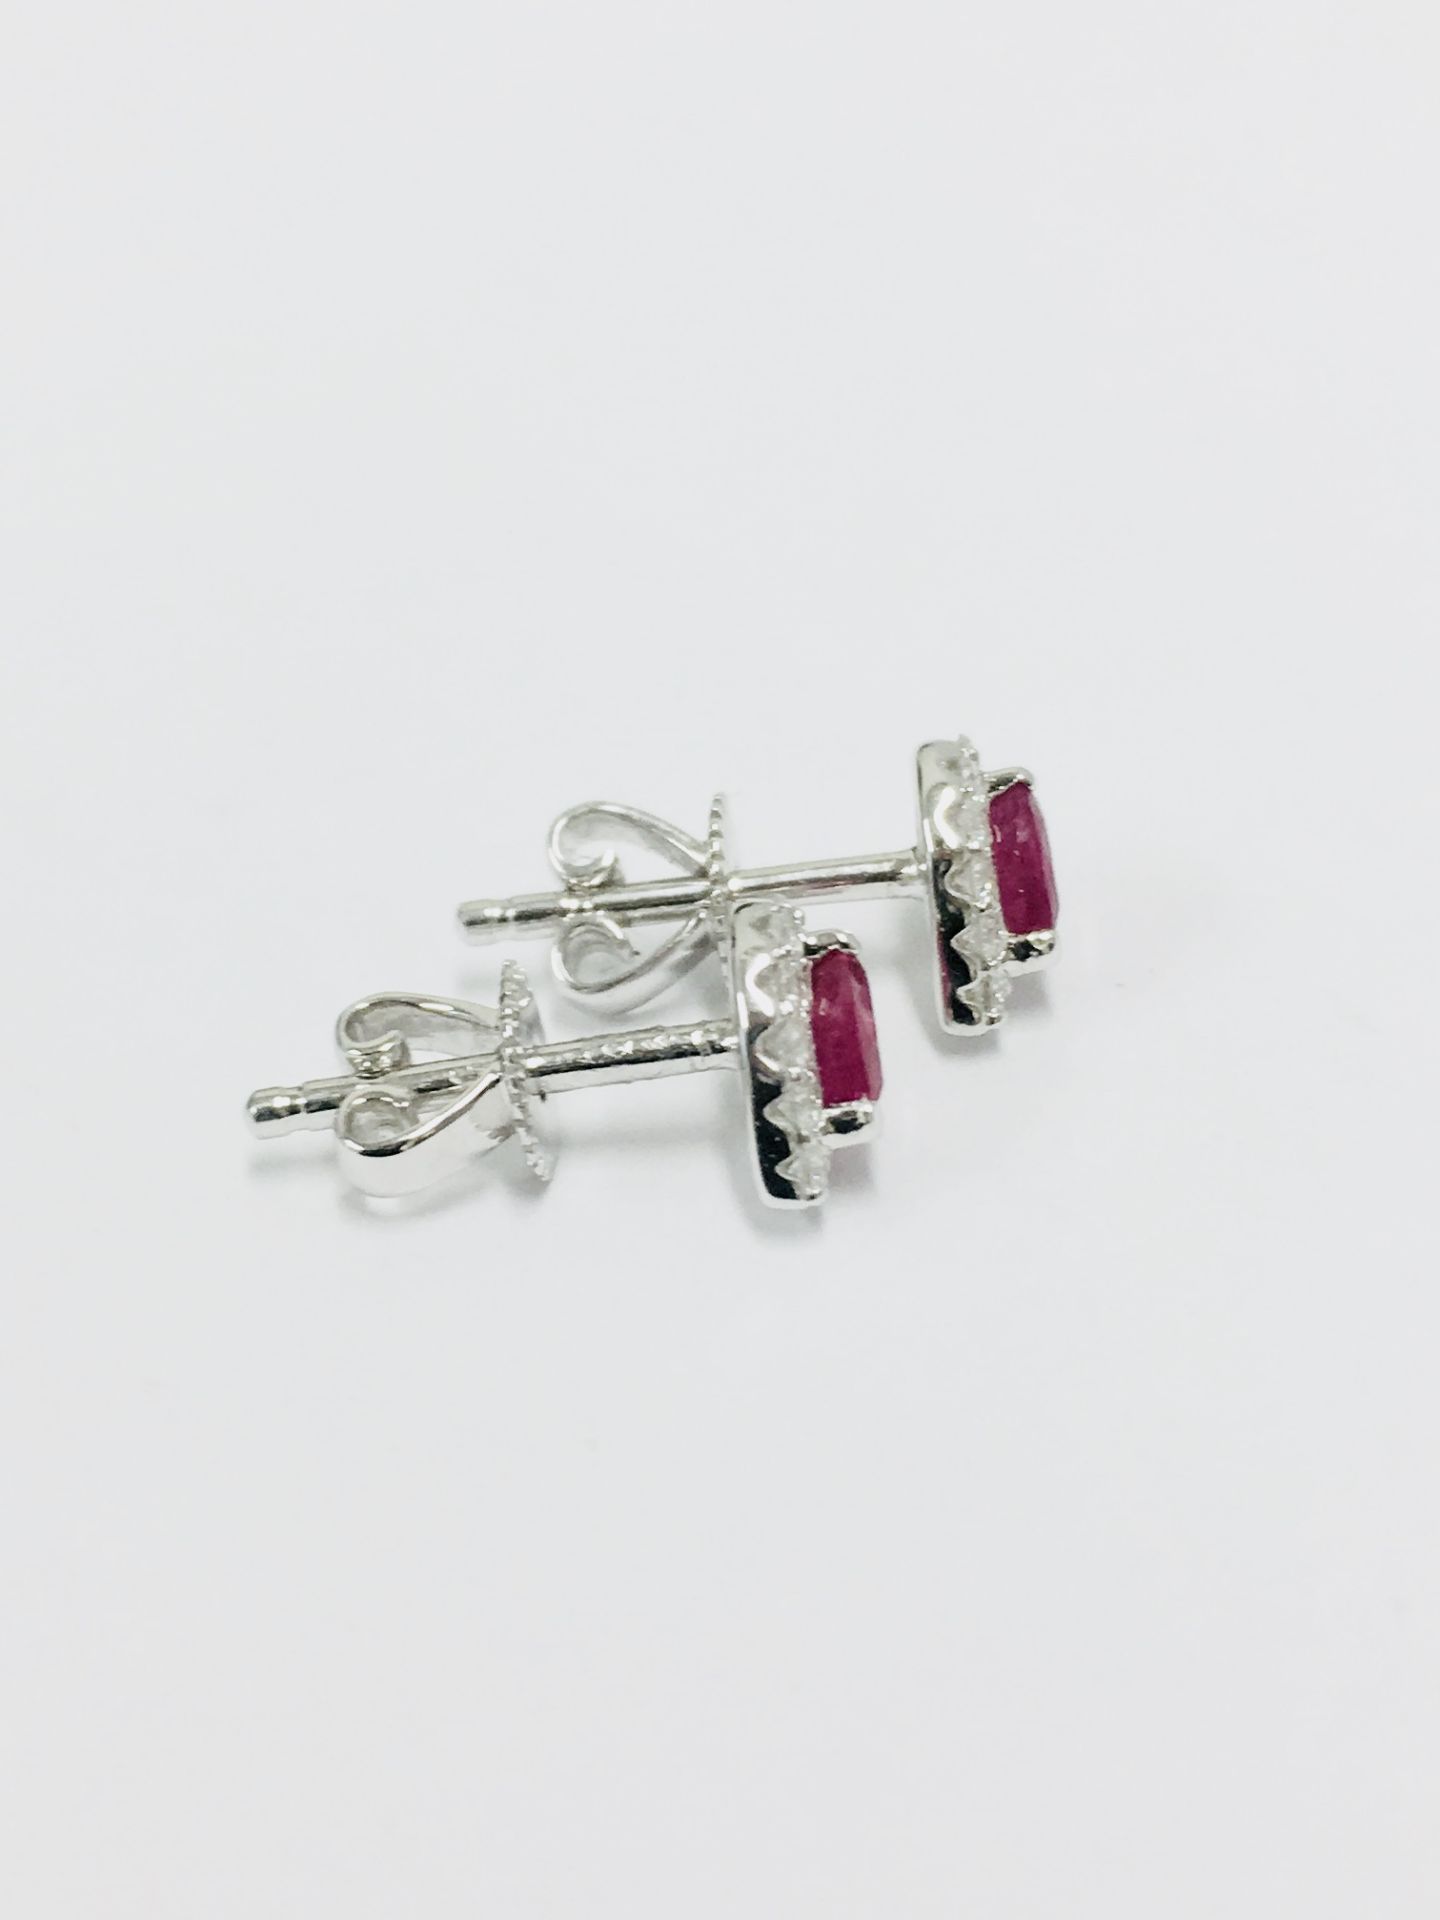 18Ct White Gold Ruby & Diamond Earrings - Image 3 of 3